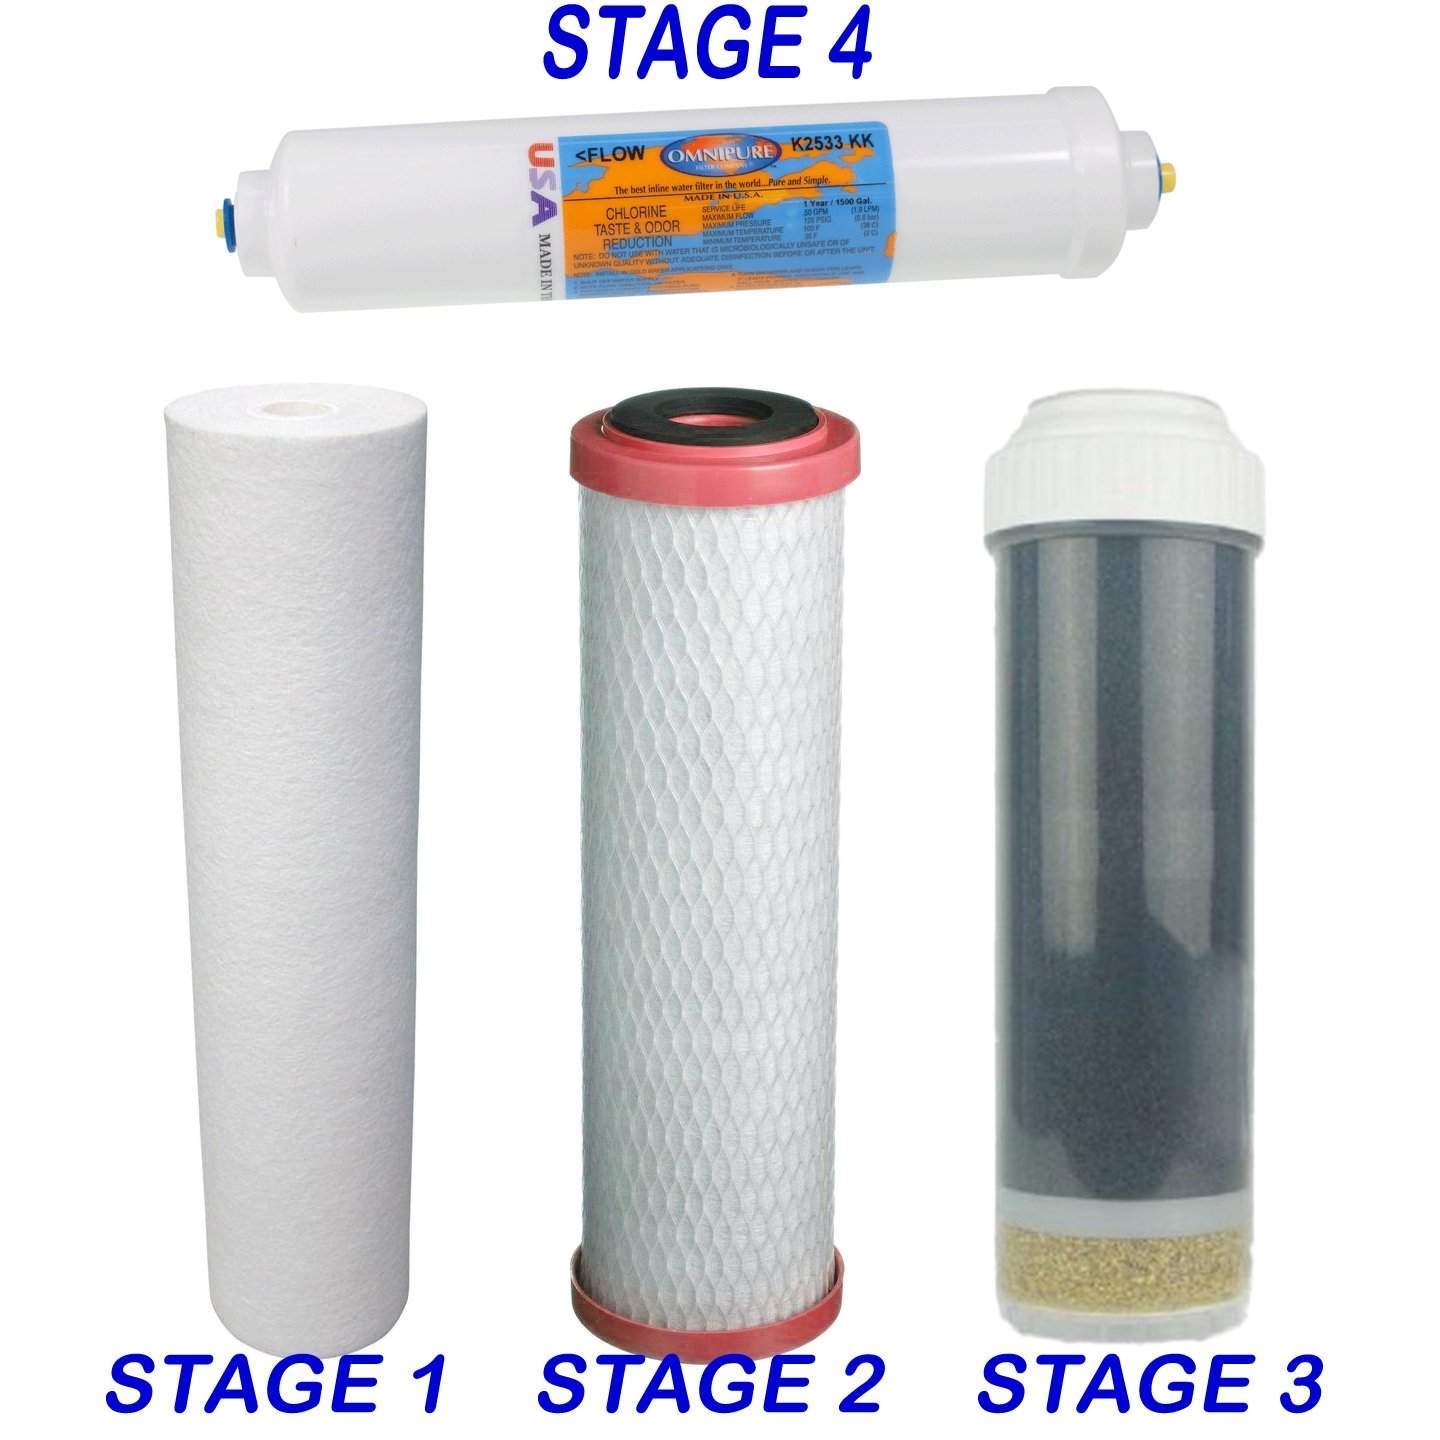 4 Stage Replacement Filter Set - NO Flouride Reduction-waterglory-10",2500 gallons,AMMONIA,ARSENIC,CADMIUM,CHLORAMINE,CHLORINE | BAD TASTES & ODORS,CHROMIUM,HEAVY METALS,INSECTICIDES AND HERBICIDES,Replacement Filters,SEDIMENT | DIRT | RUST | SAND | SILT,THM’S,VOC’S